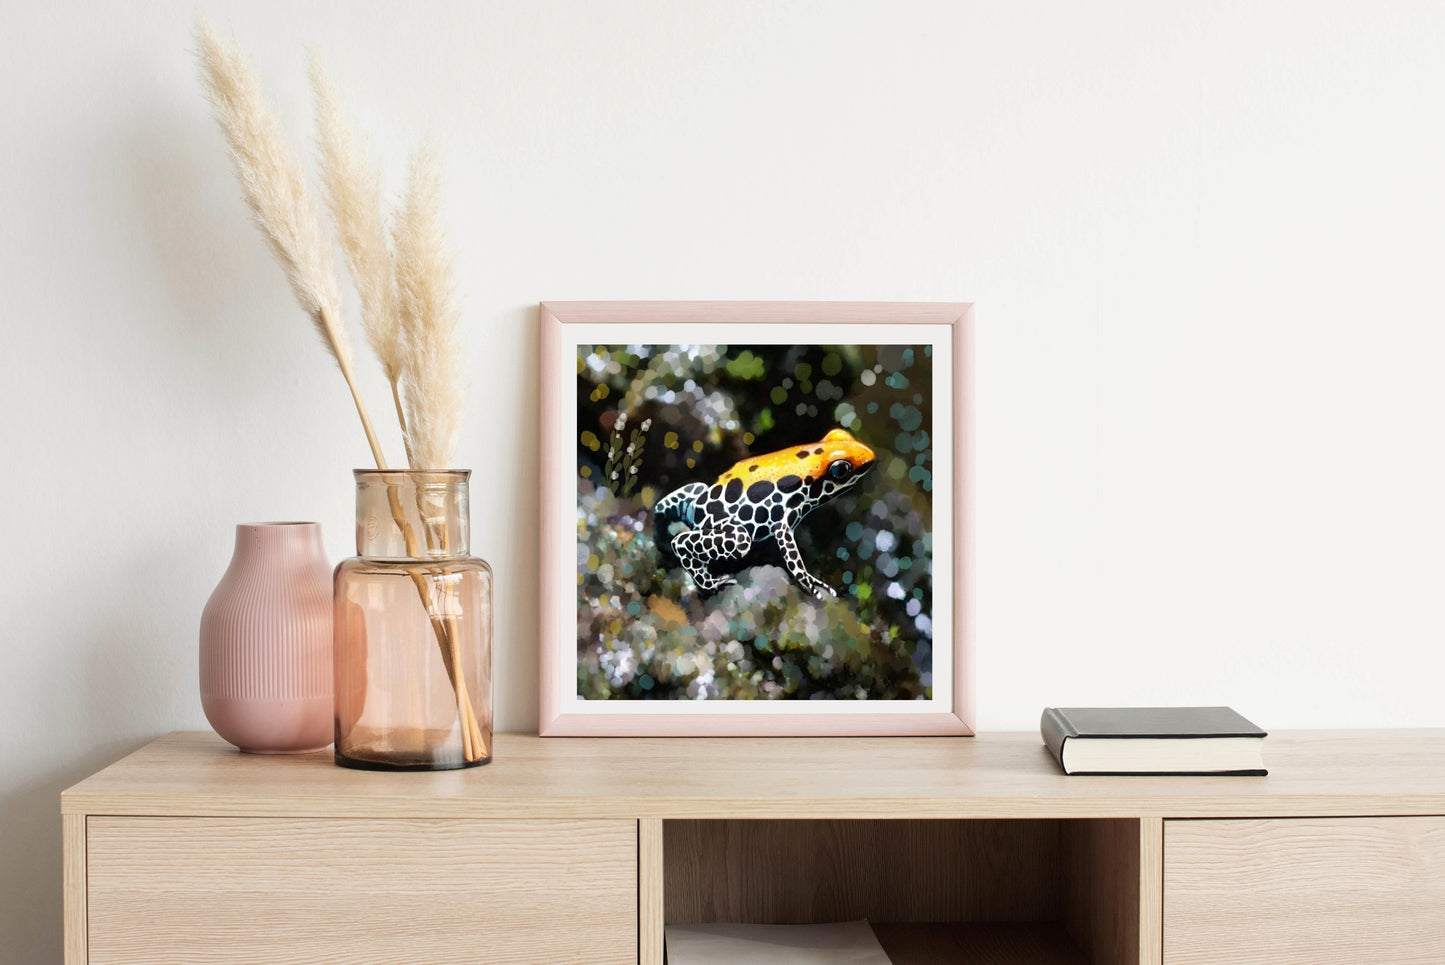 Dart frog in a Digital World - Illustrated Print by Thomas Little